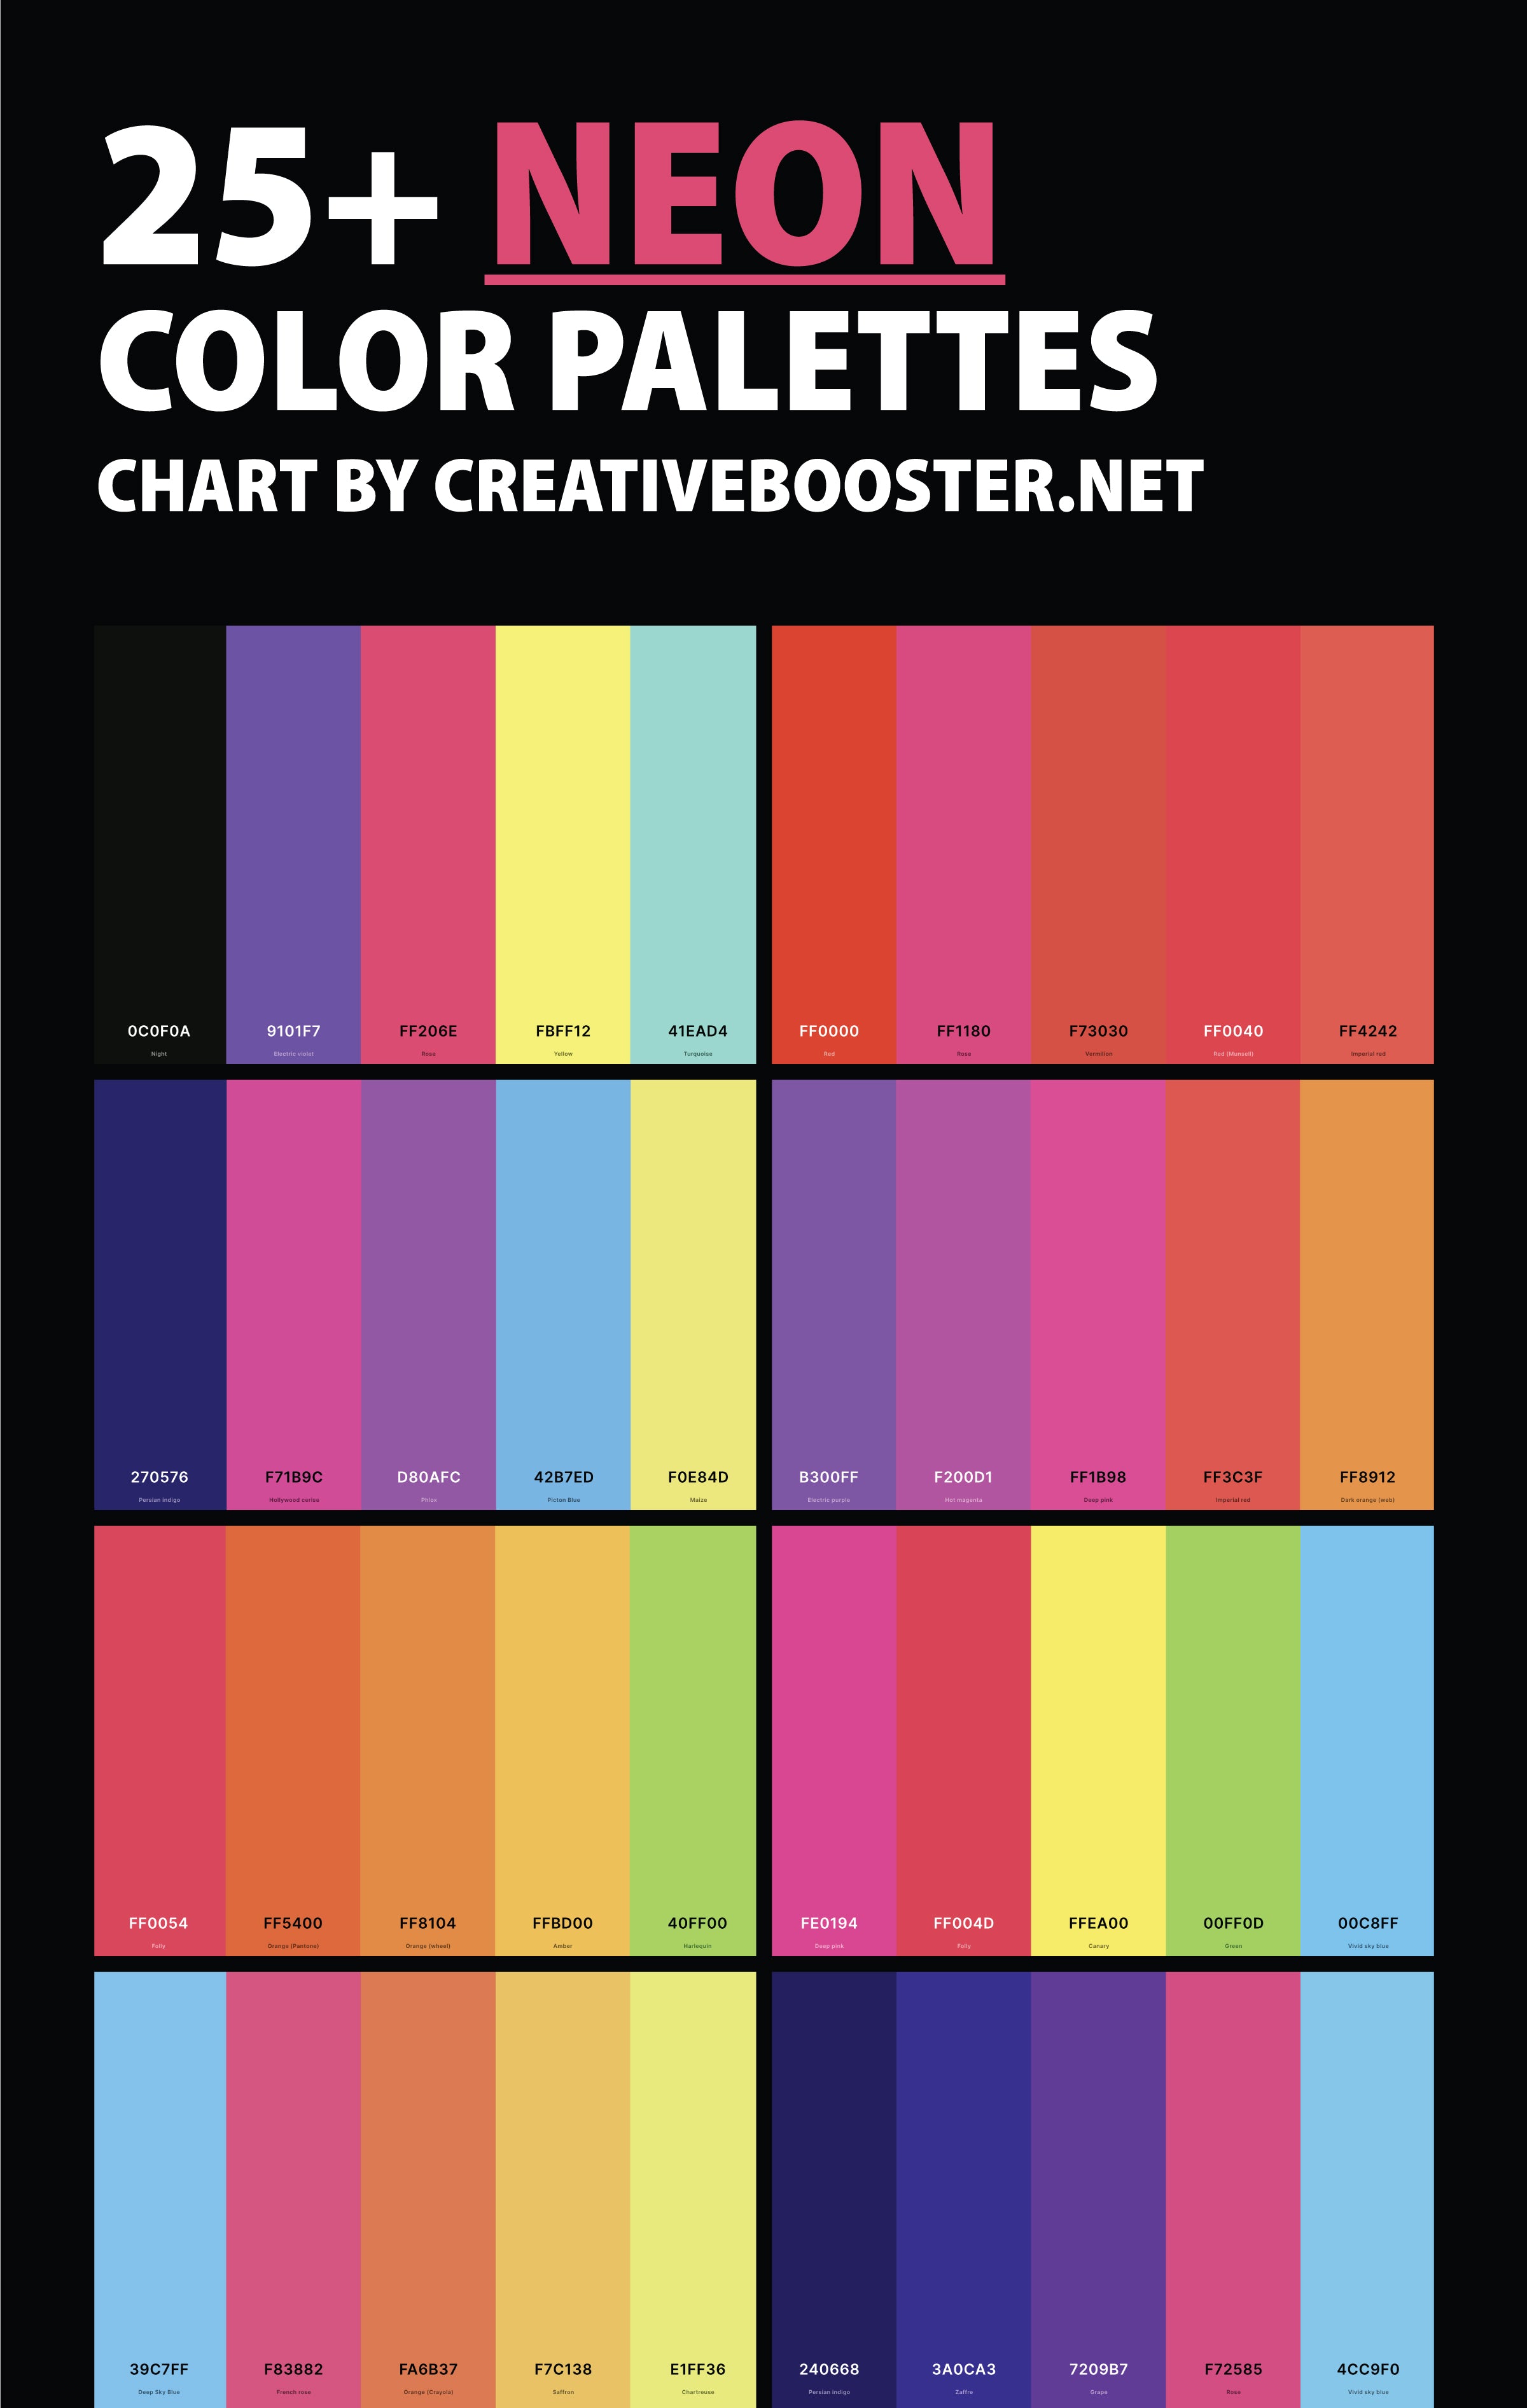 neon-color-palettes-chart-with-names-and-hex-codes-pinterest